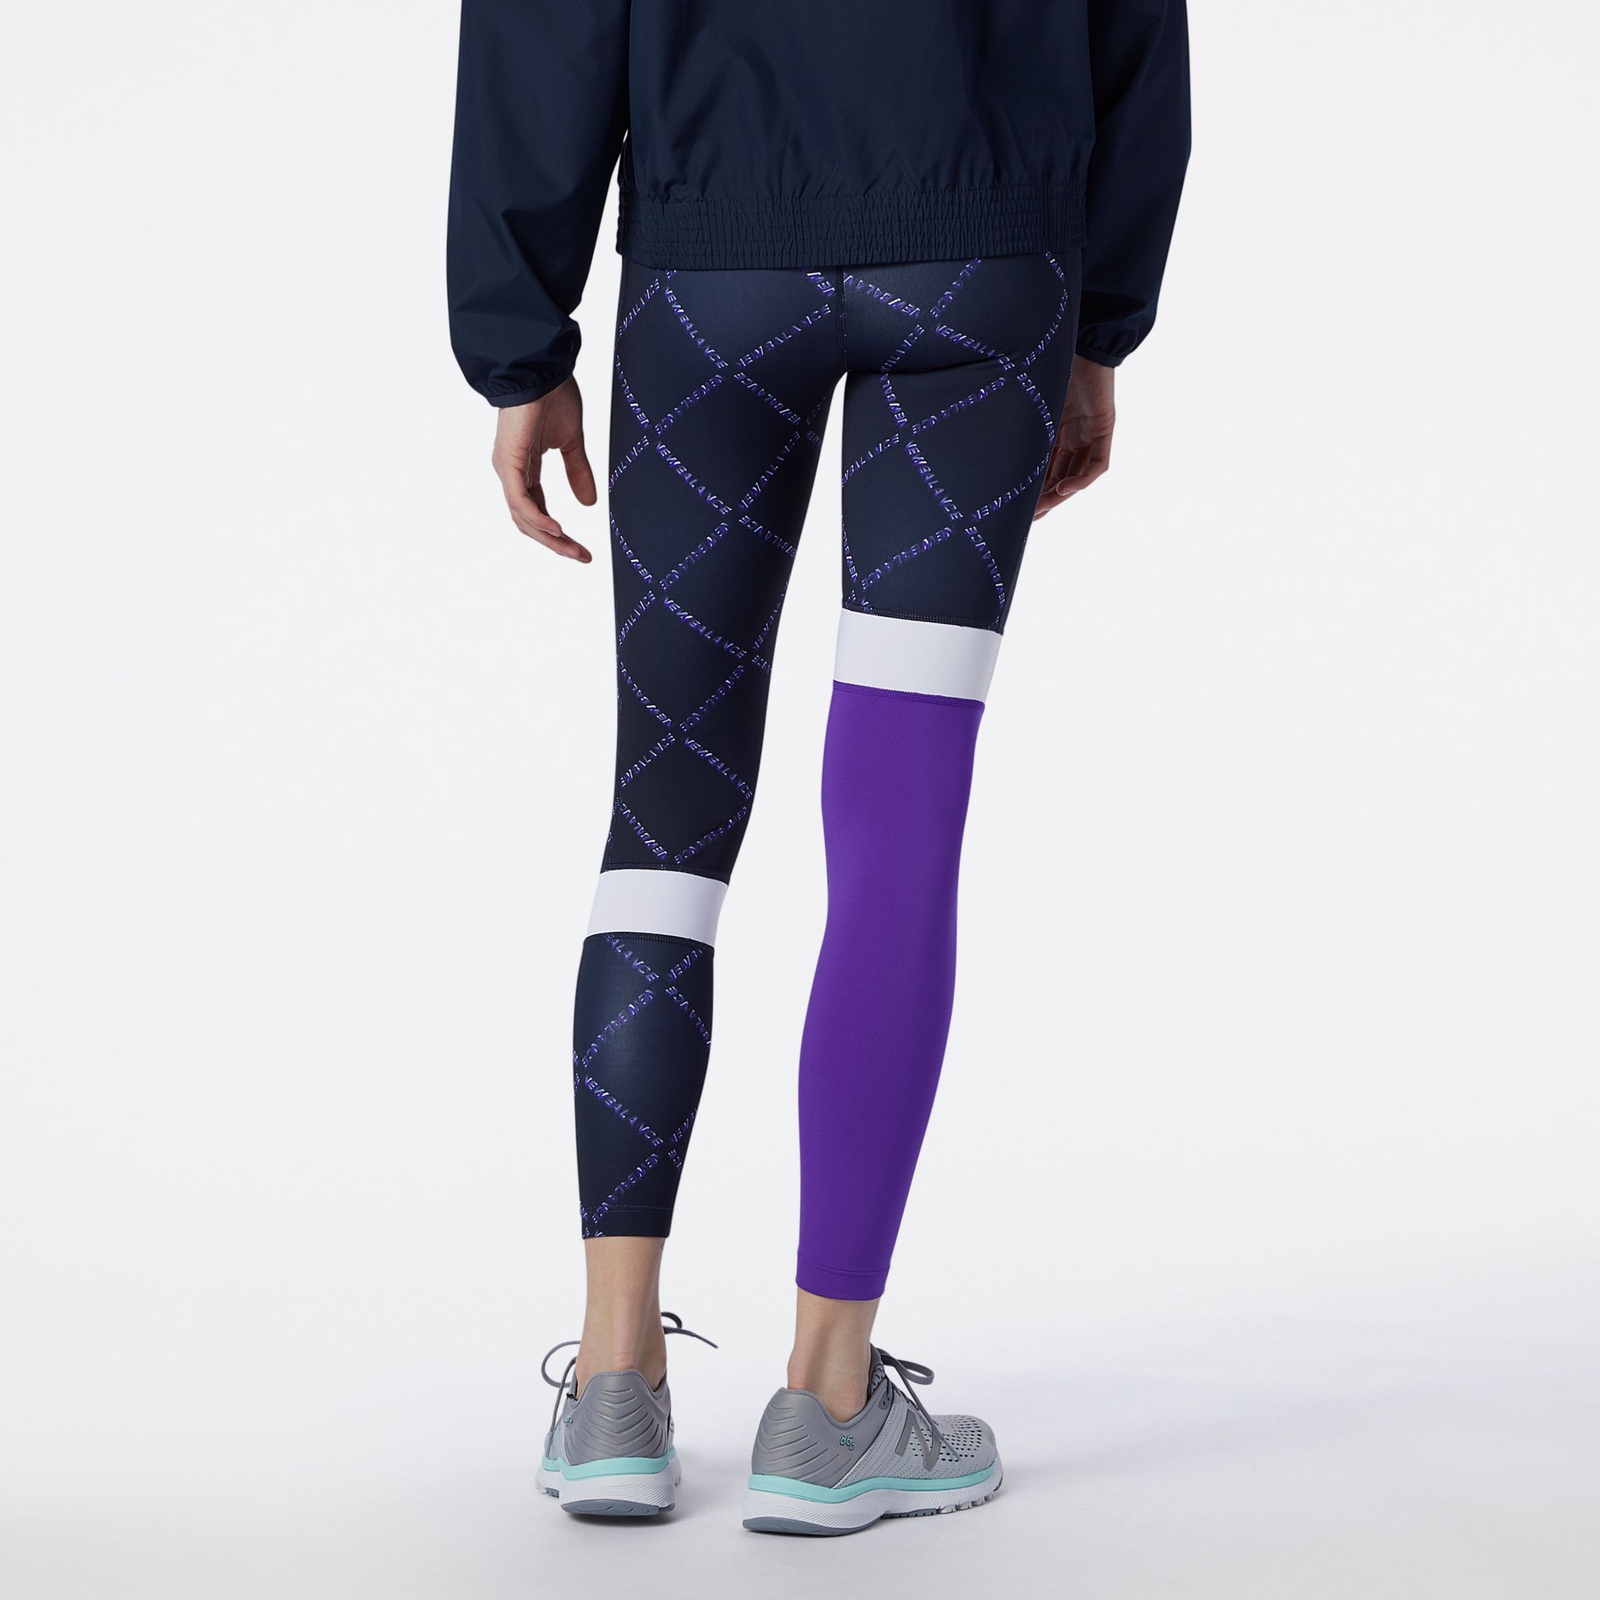 New Balance Achiever Printed Collide High-Rise 7/8 Tights - Women's